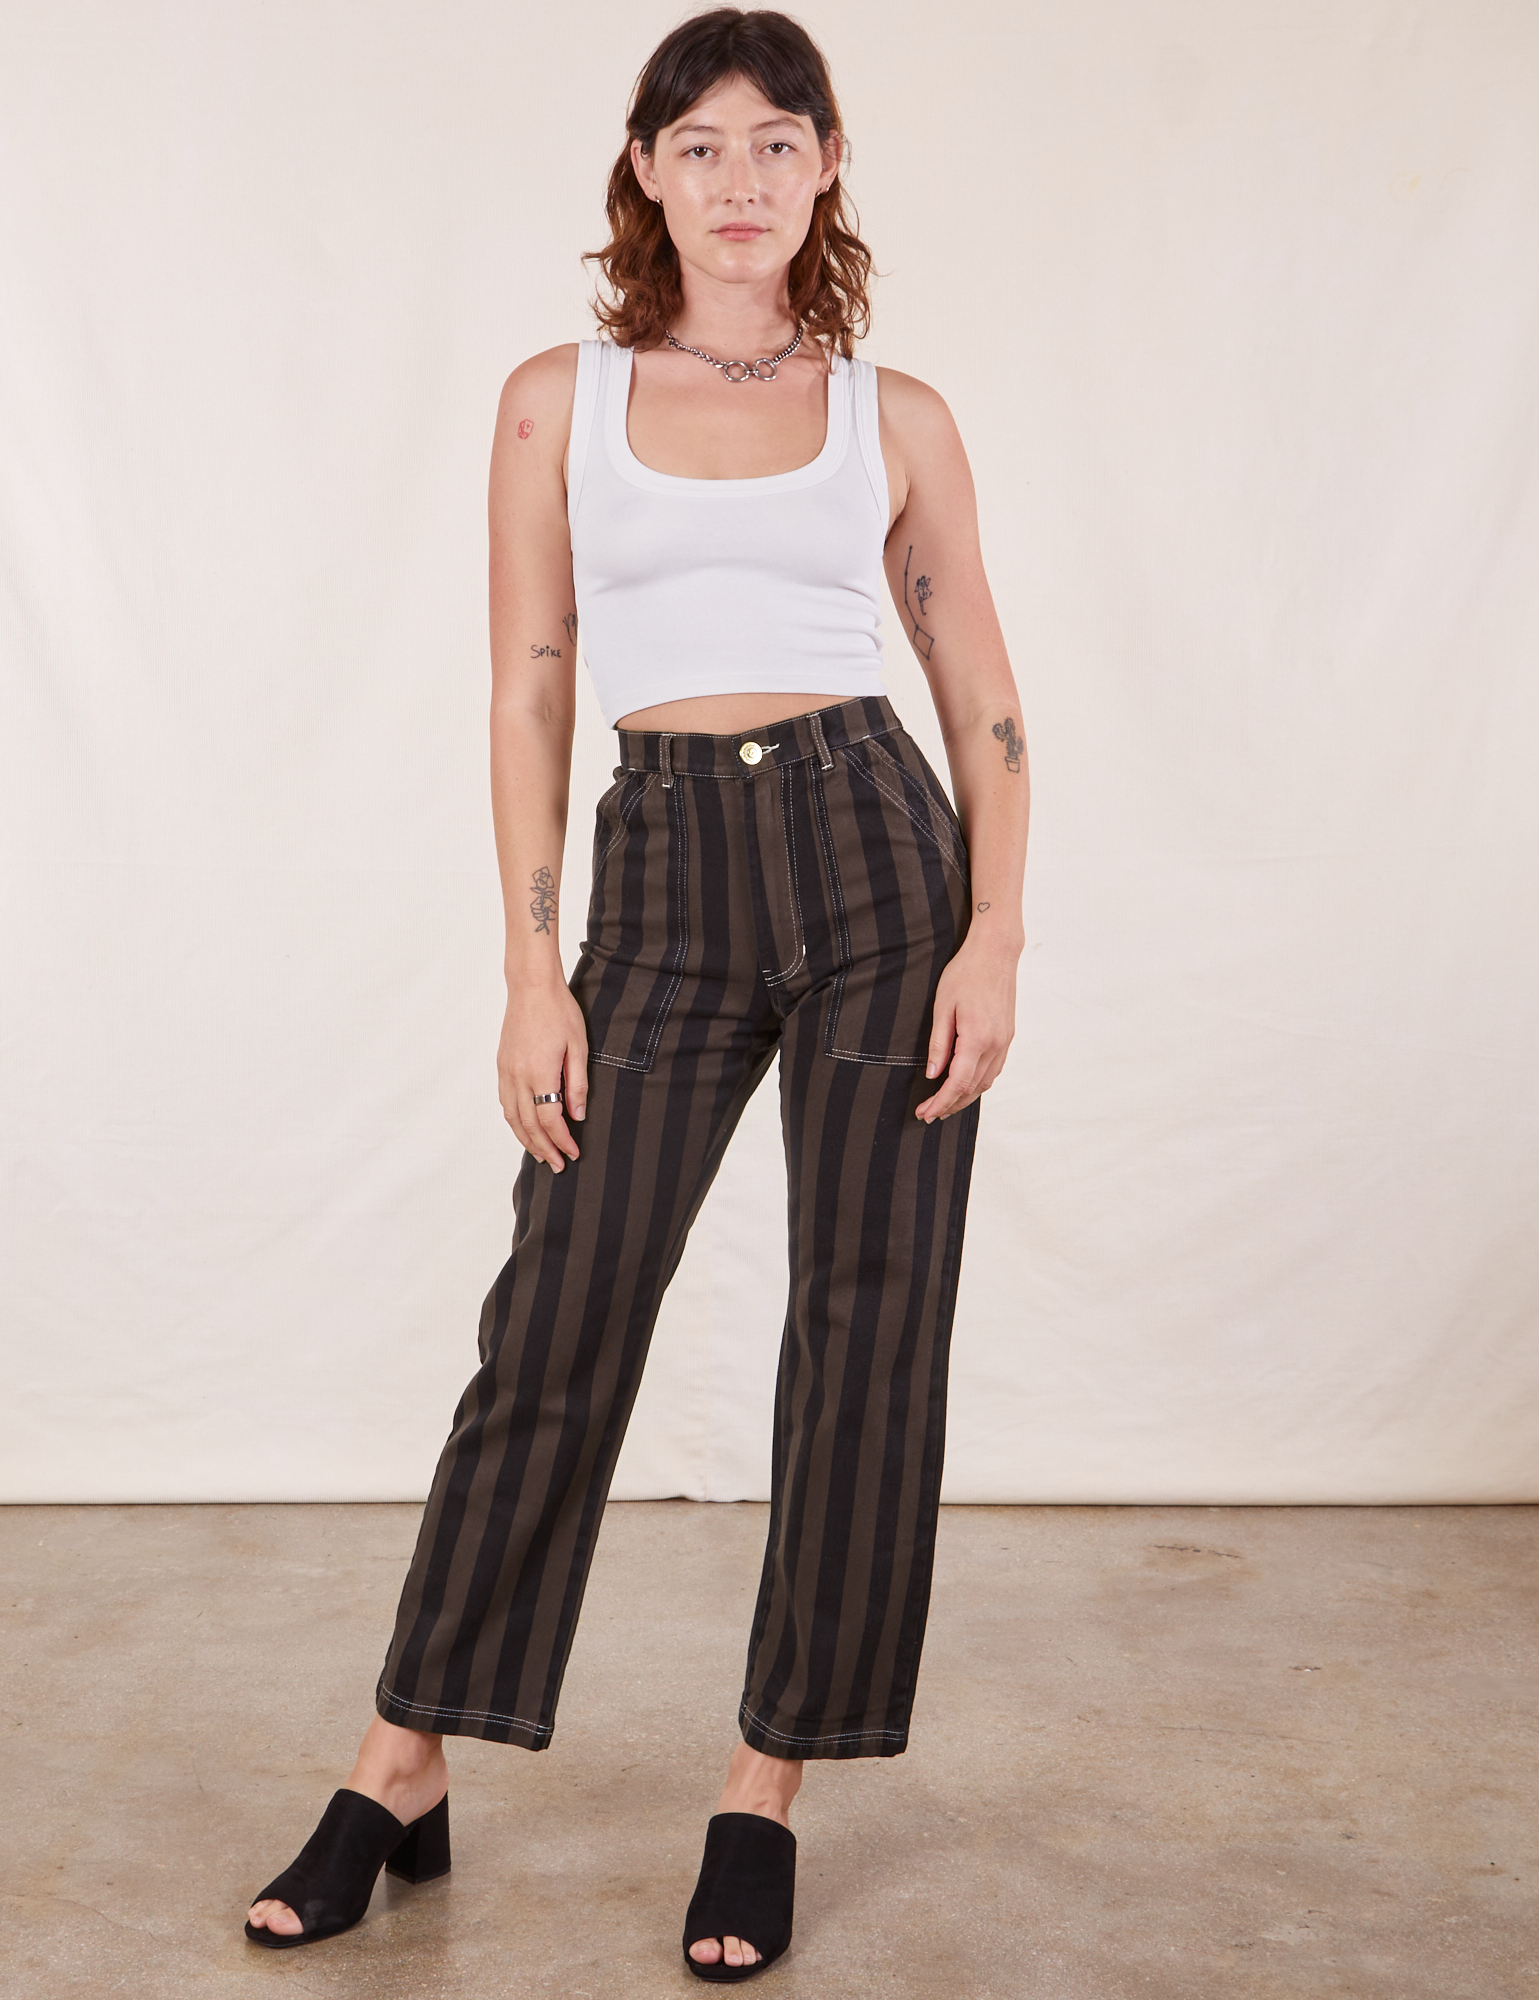 Alex is wearing Black Striped Work Pants in Espresso and vintage off-white Tank Top